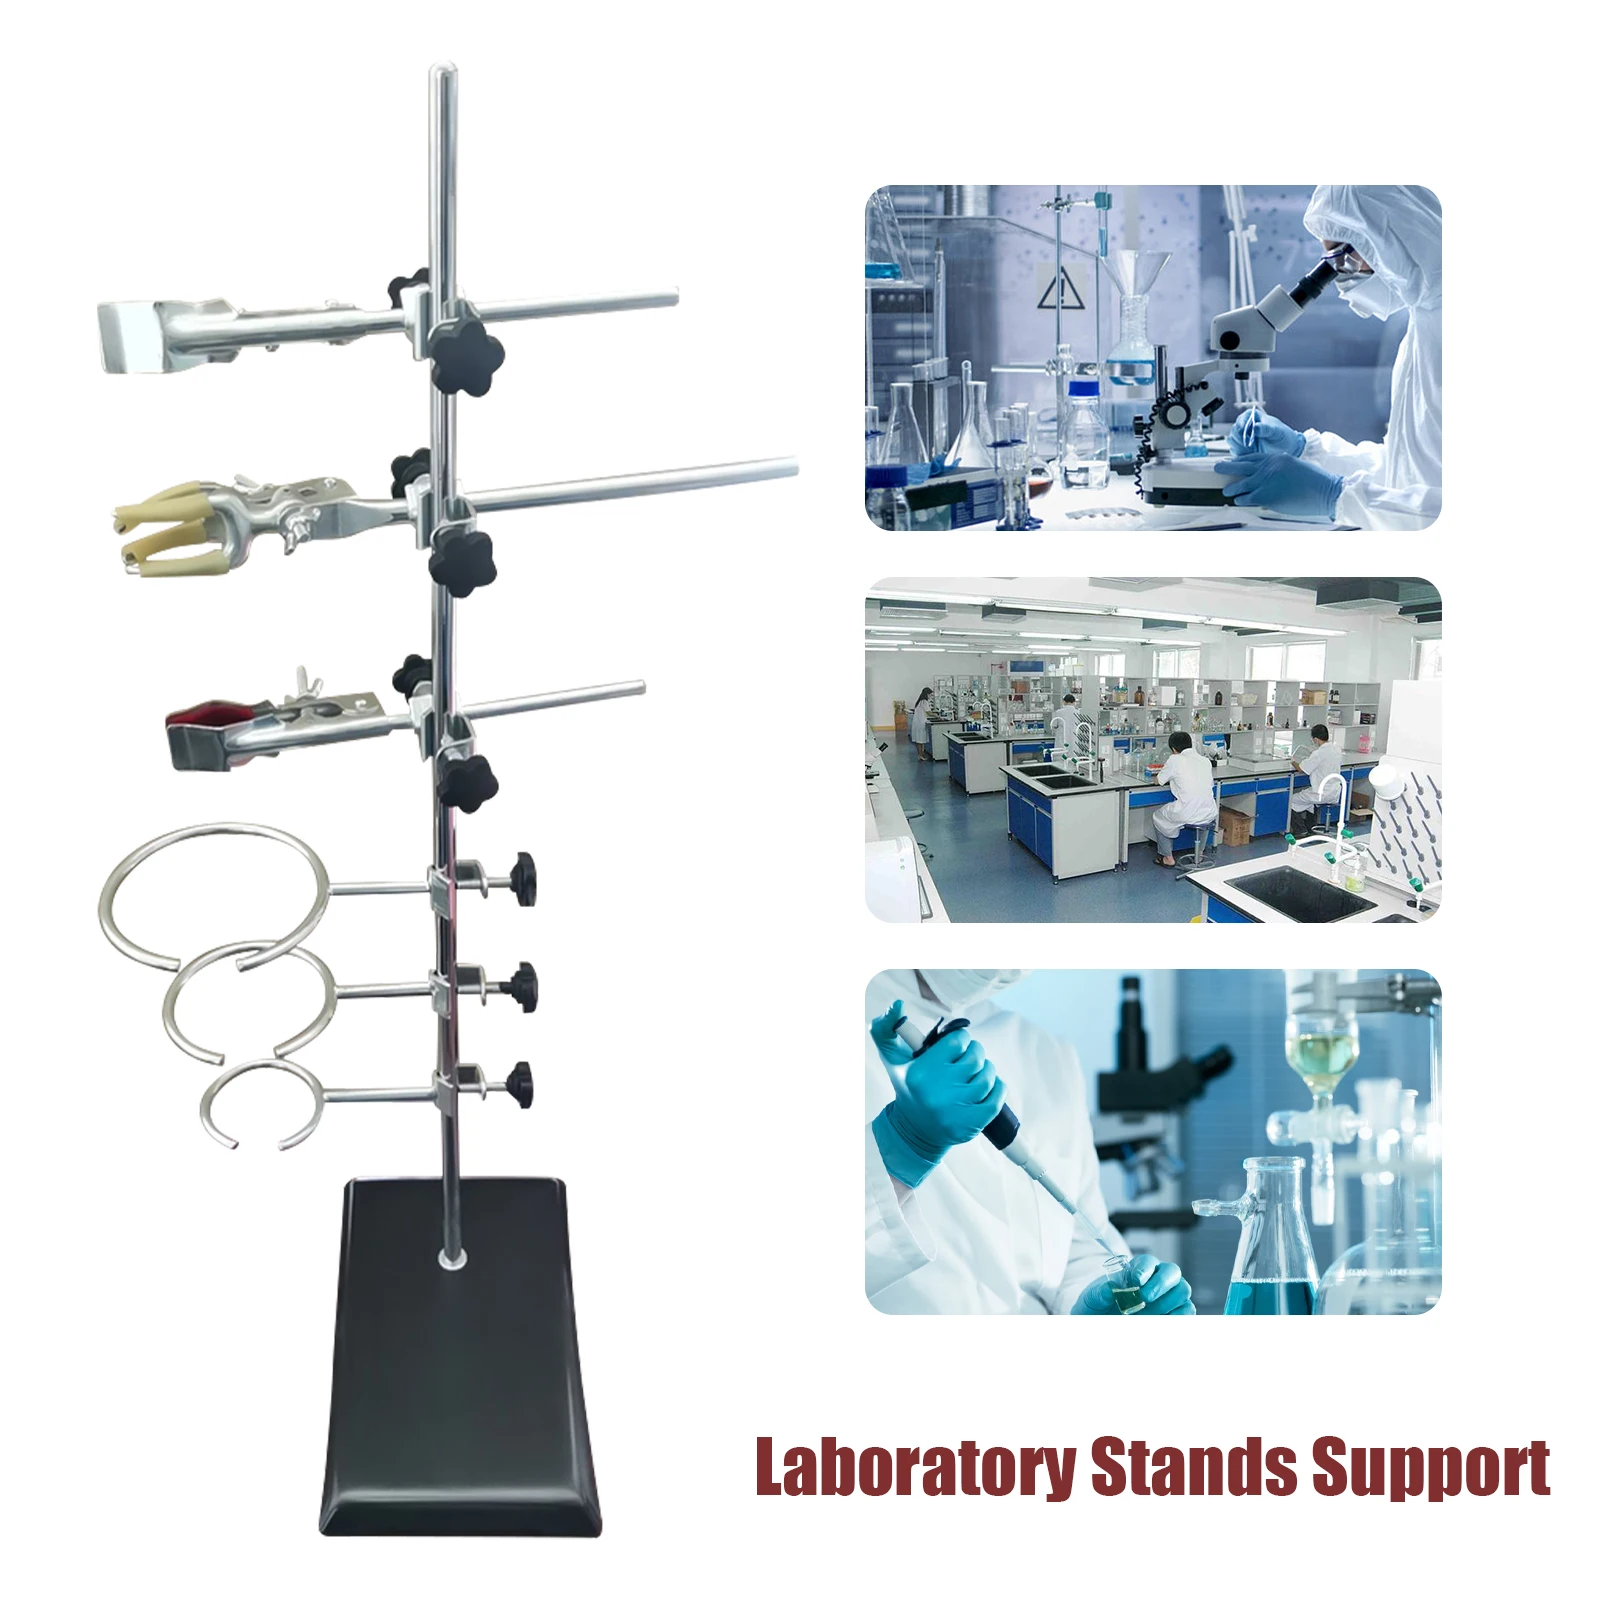 Laboratory Stands Support and Lab Clamp Flask Clamp Condenser Clamp Stands 600mm 52cm laboratory clamp flask platform adjustable height lab retort stands flask support